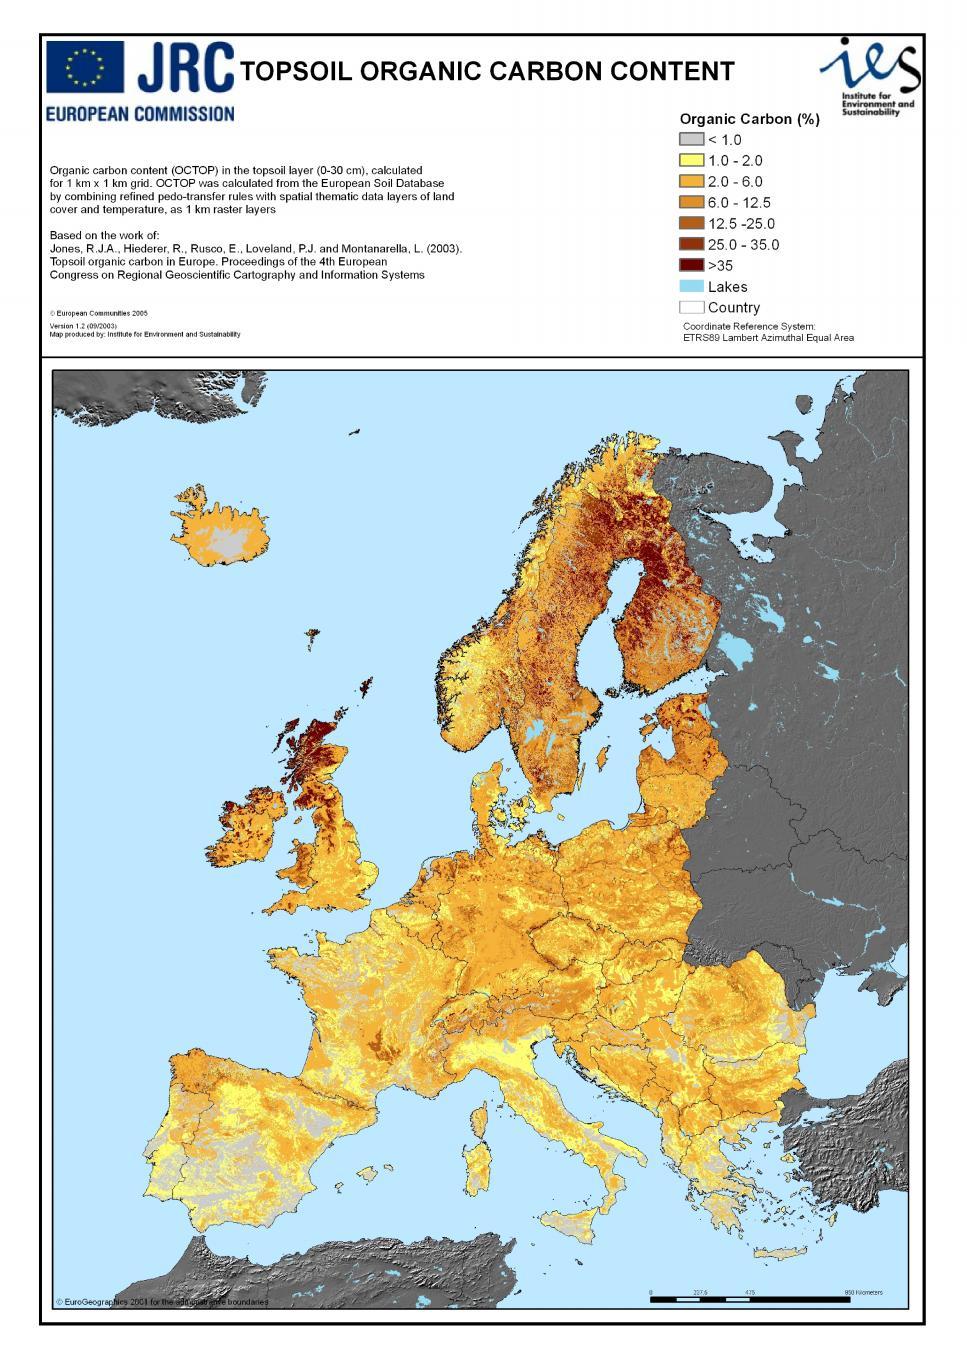 STOA - Science and Technology Options Assessment Figure B2: Organic carbon content of European